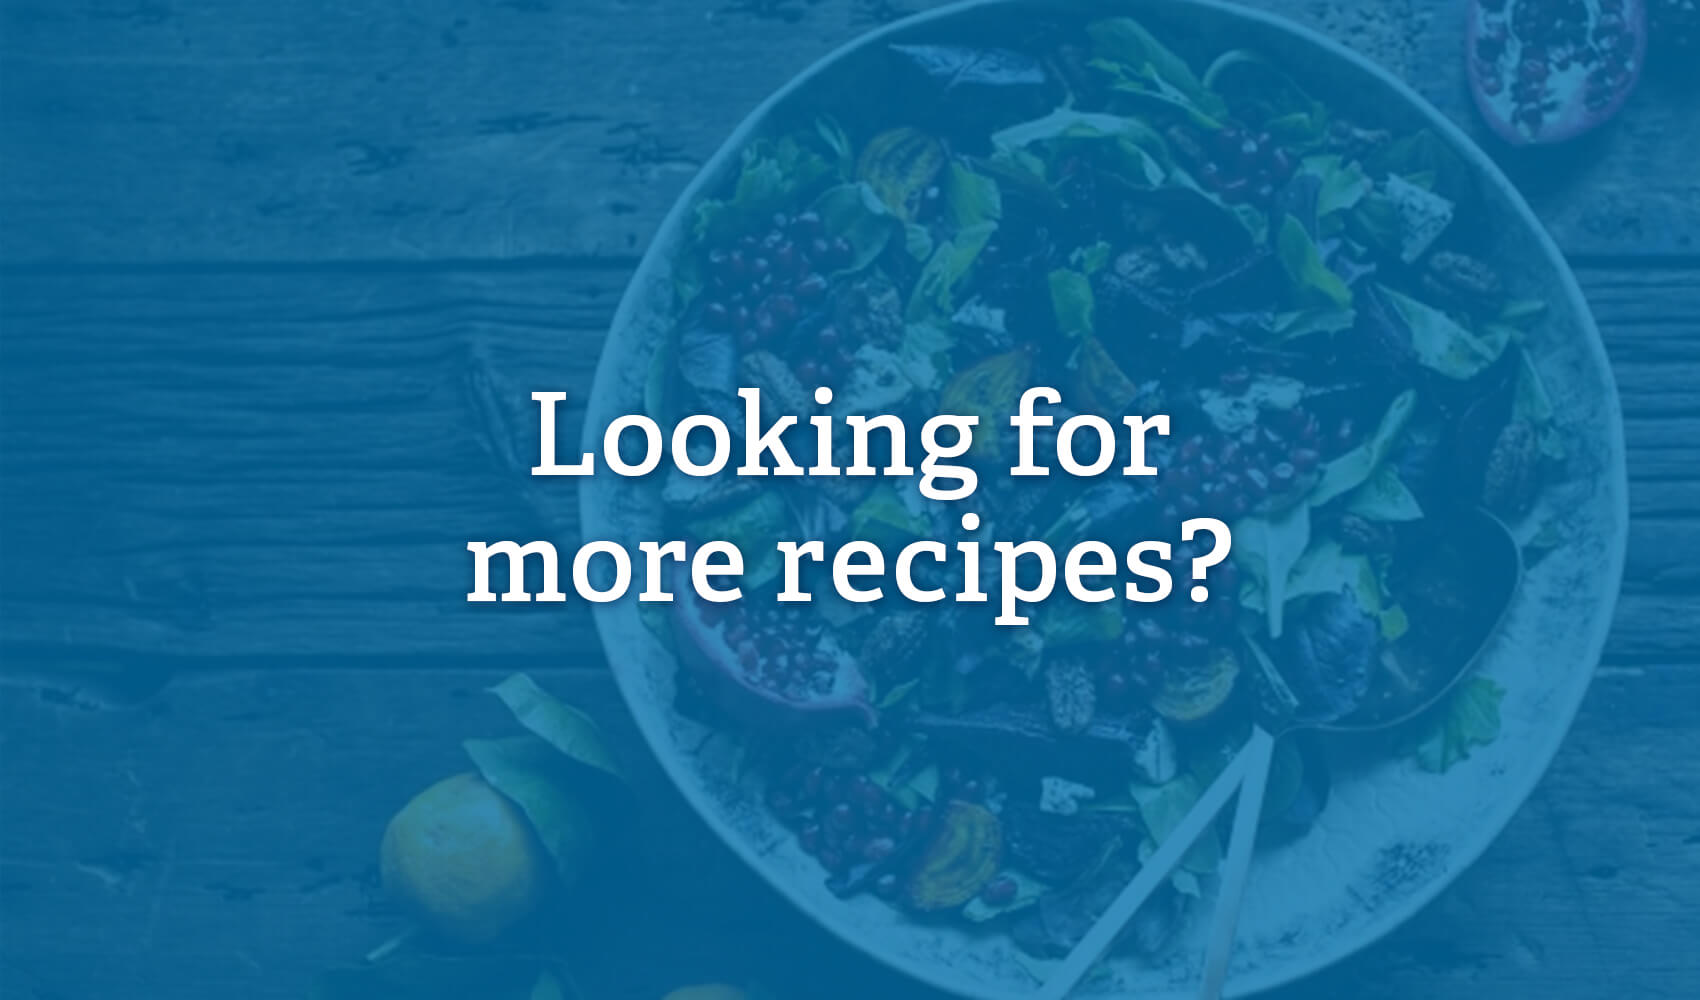 Check out our Recipe Roundup Series